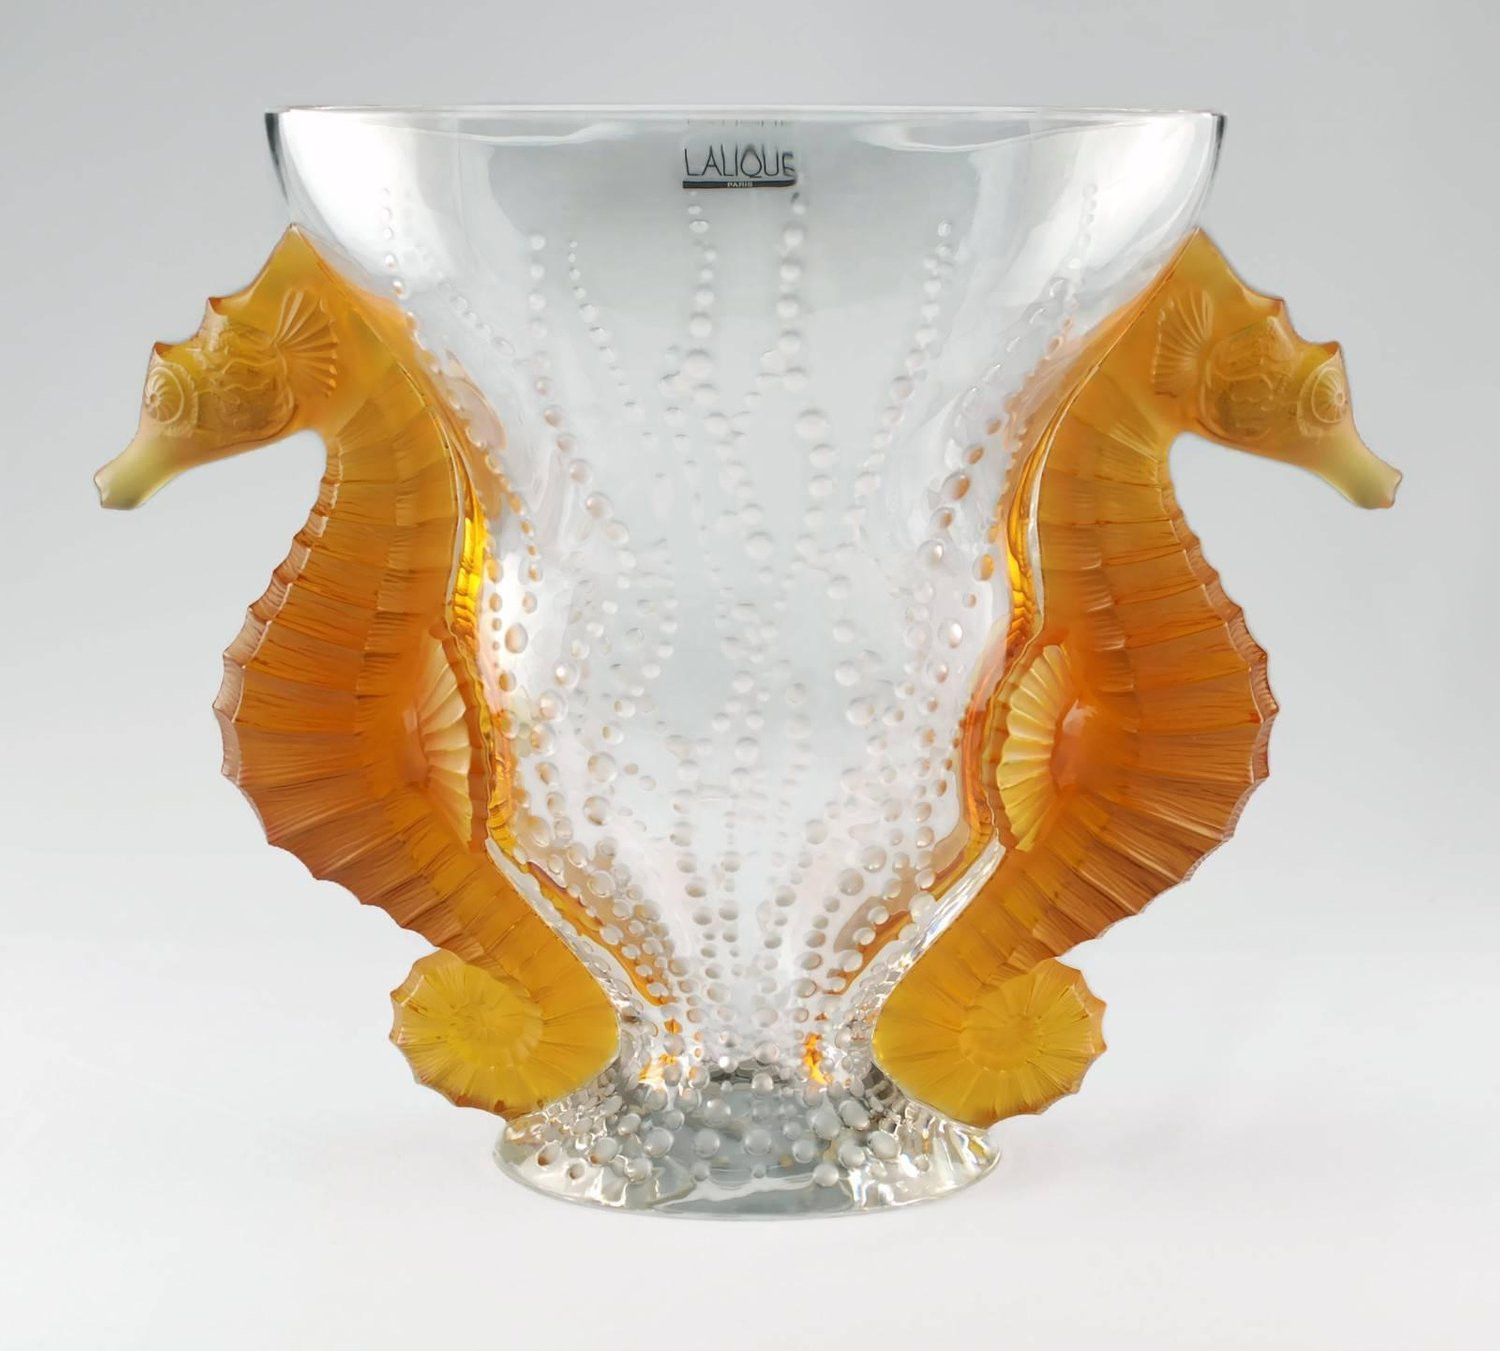 12 Recommended Lalique Dove Vase 2024 free download lalique dove vase of lalique limited edition poseidon vase with amber seahorse motif at regarding lalique limited edition poseidon vase with amber seahorse motif at 1stdibs